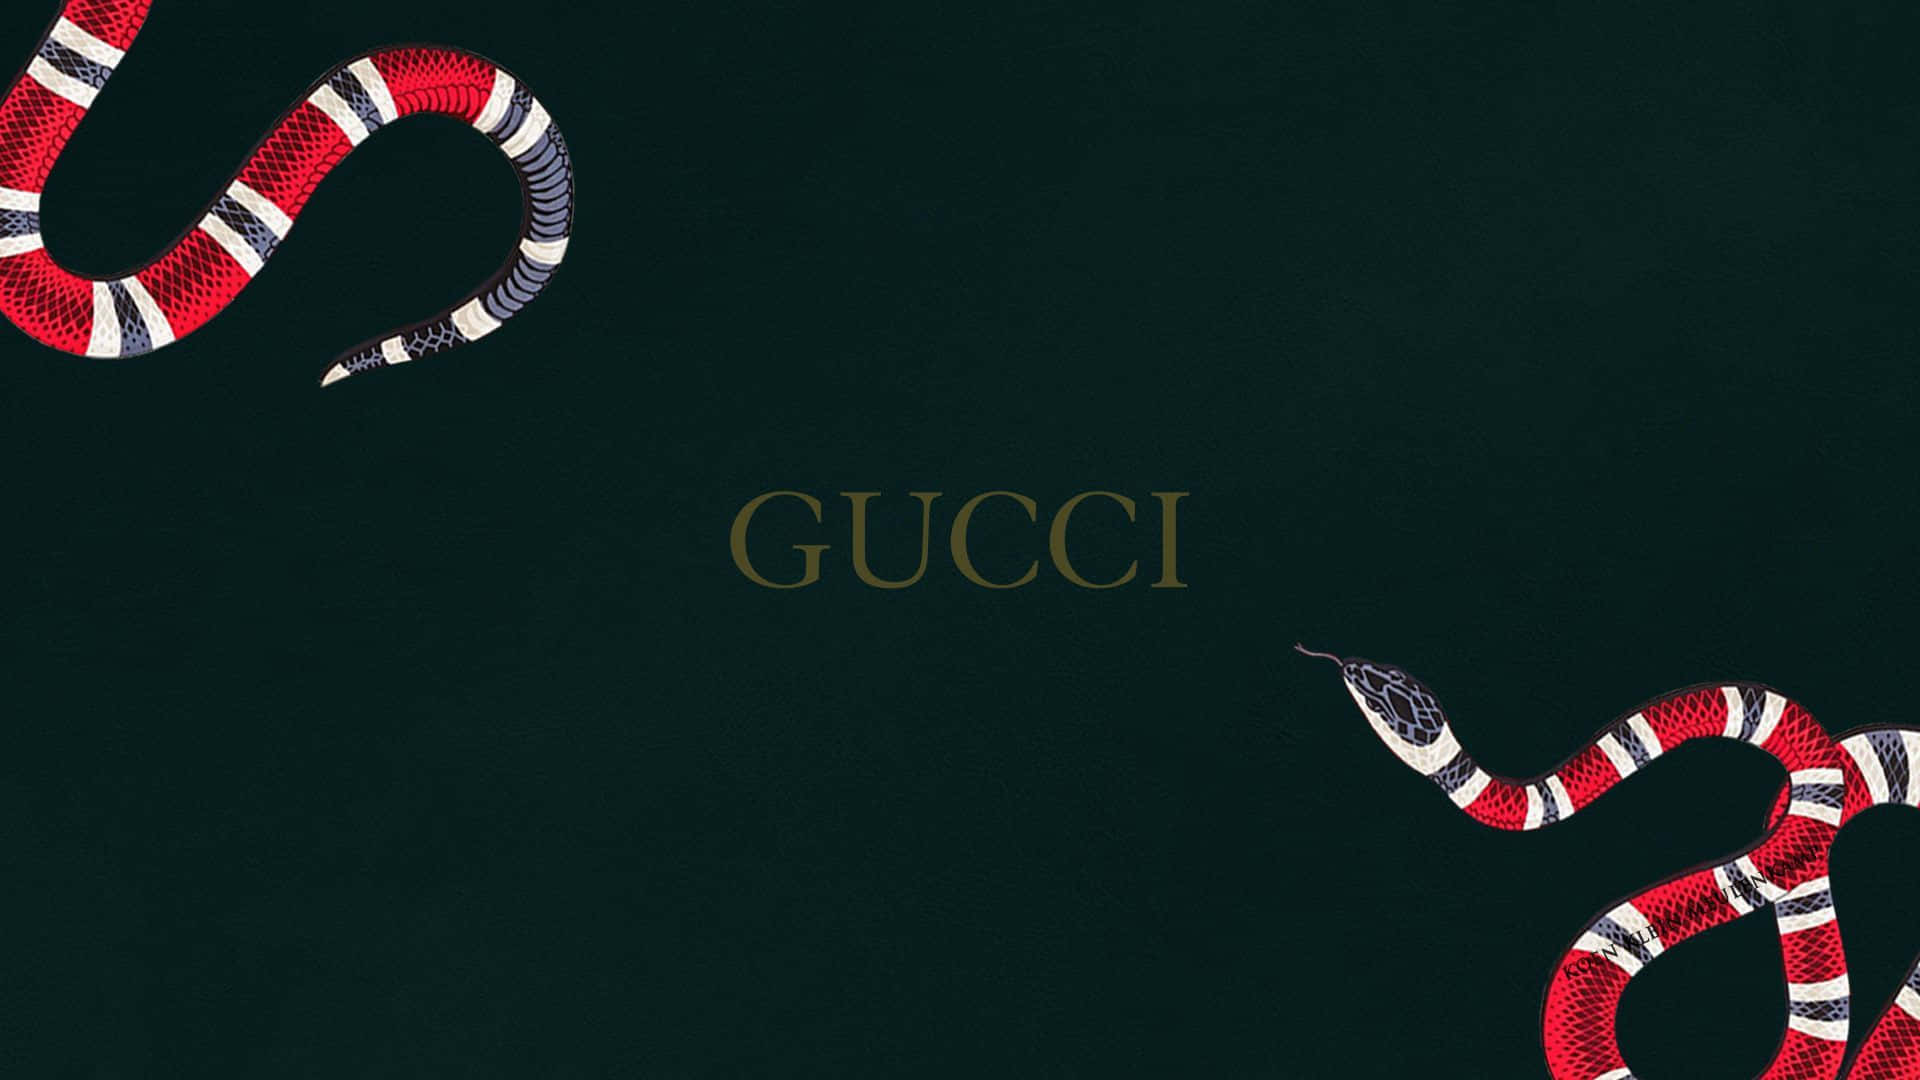 Artistic Green Gucci Text With Snakes Background